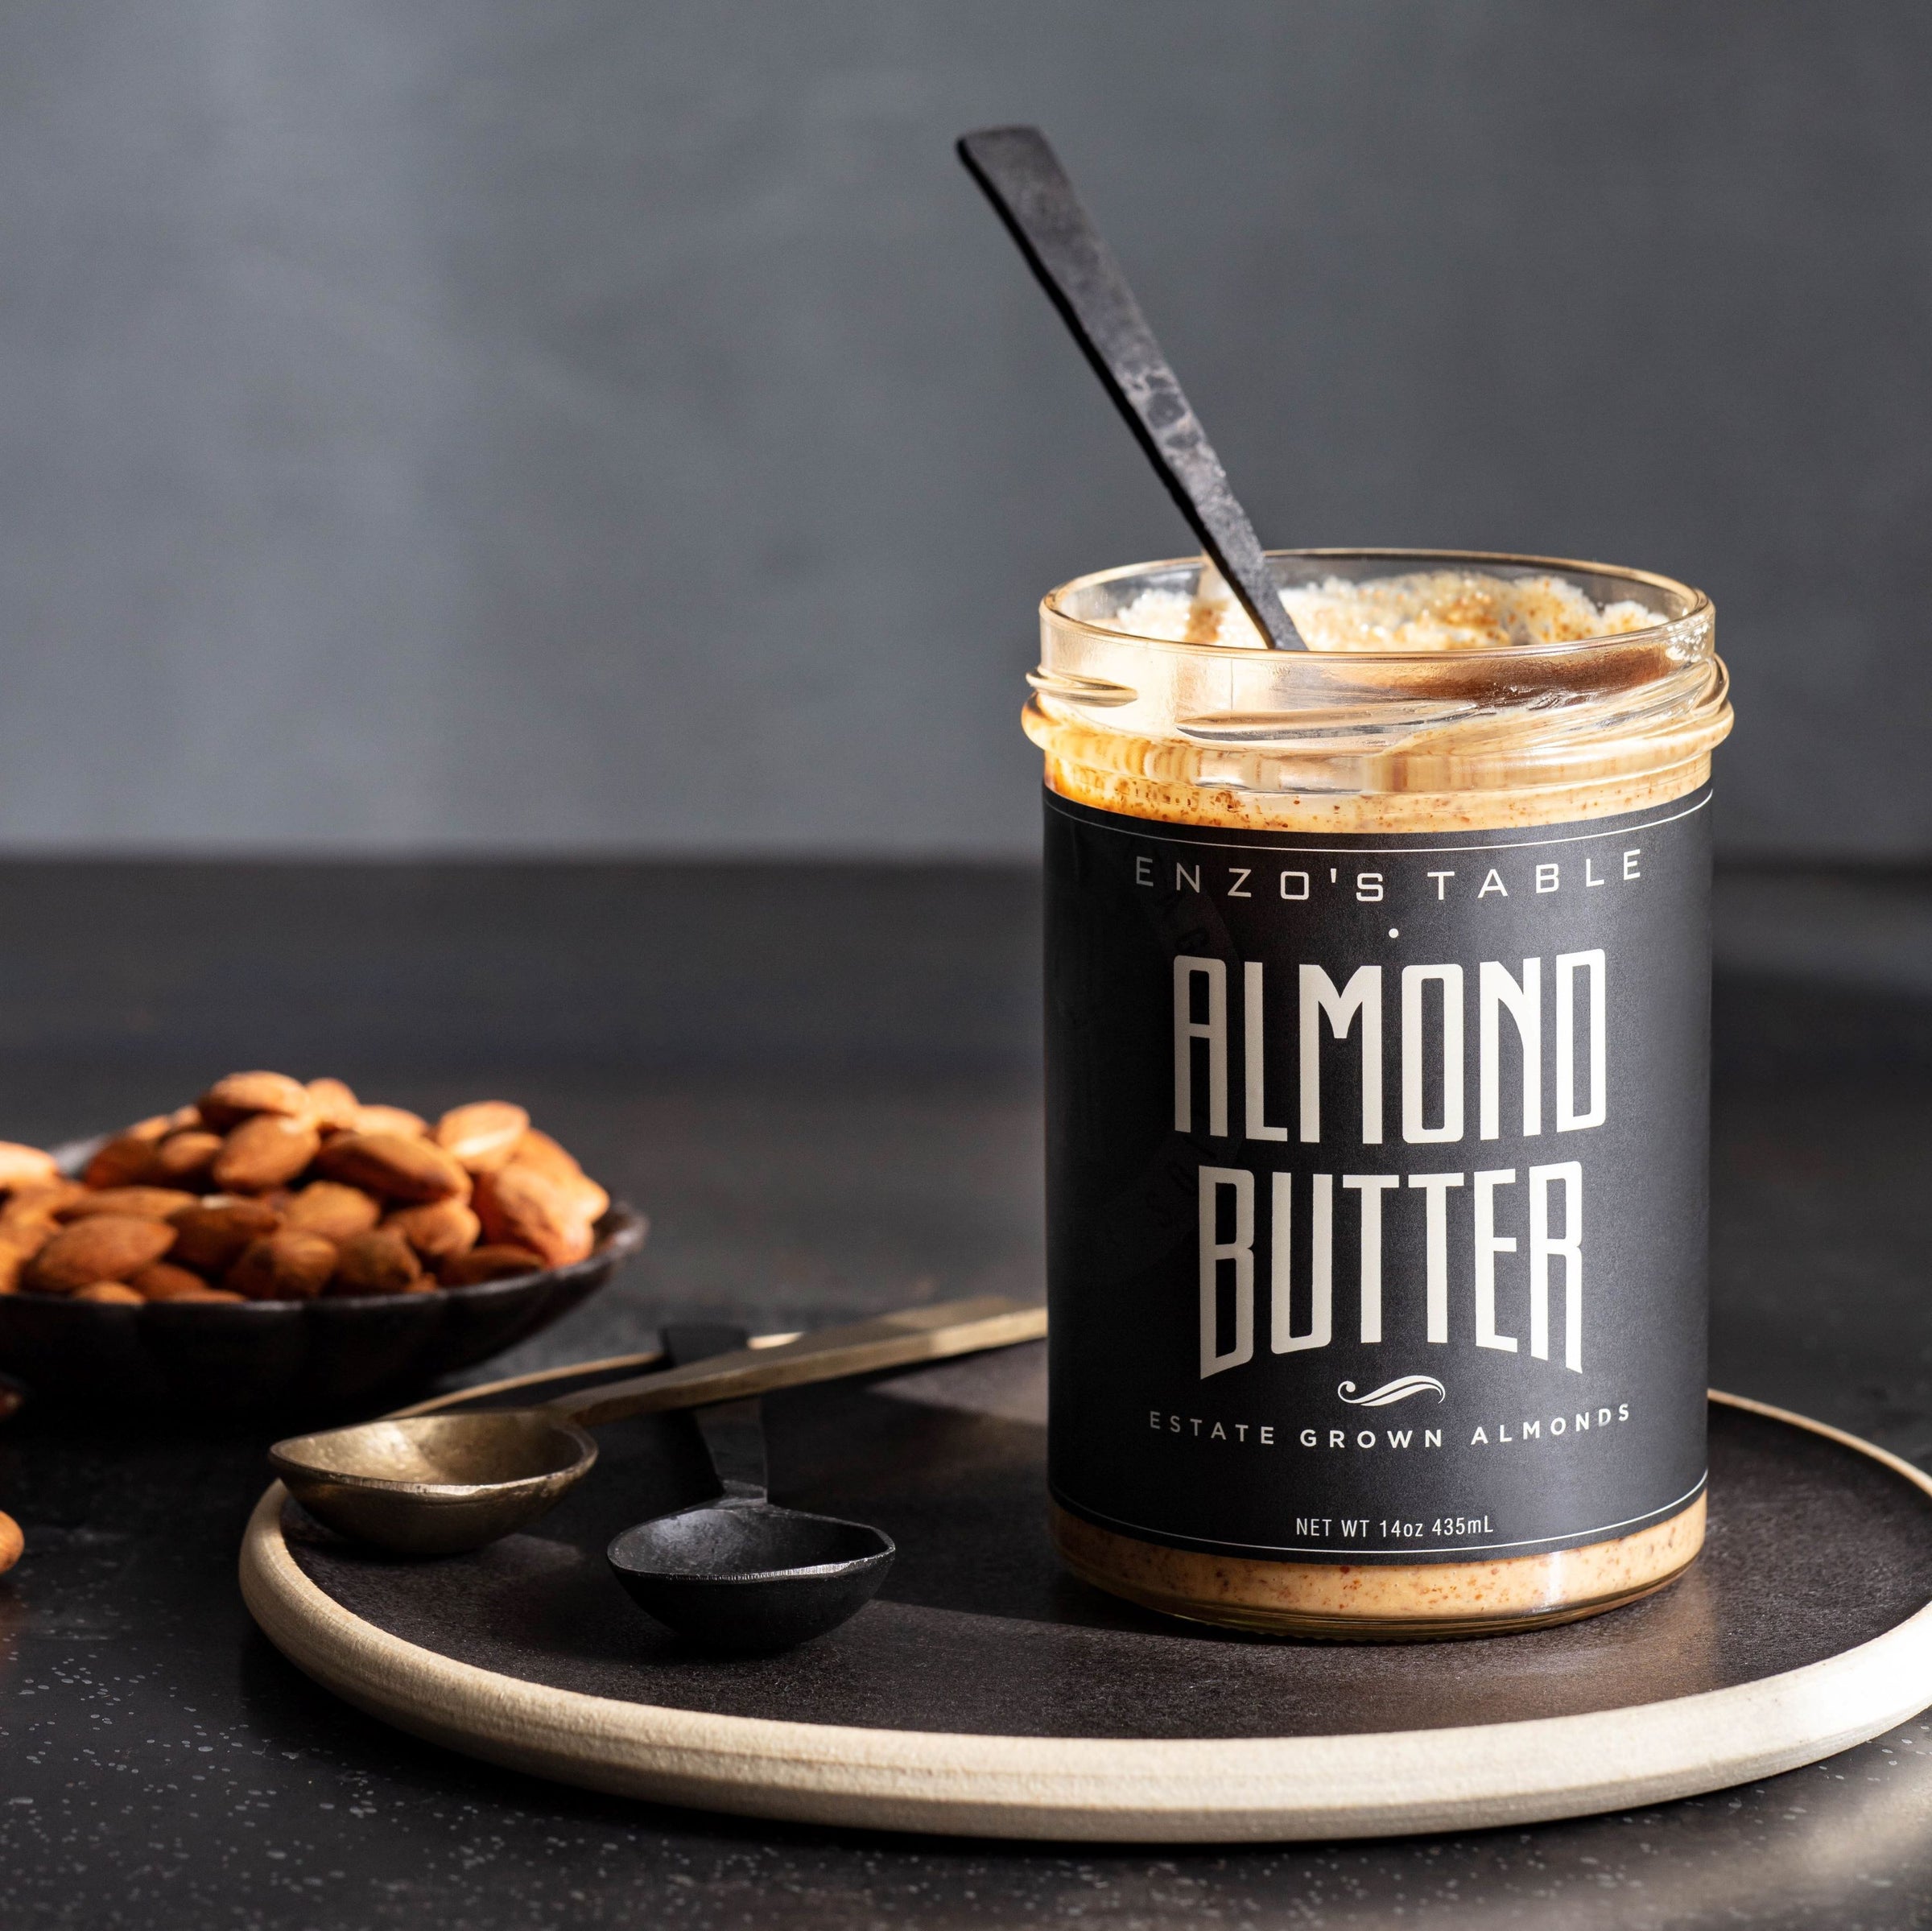 Estate-Grown, Handcrafted Almond Butter